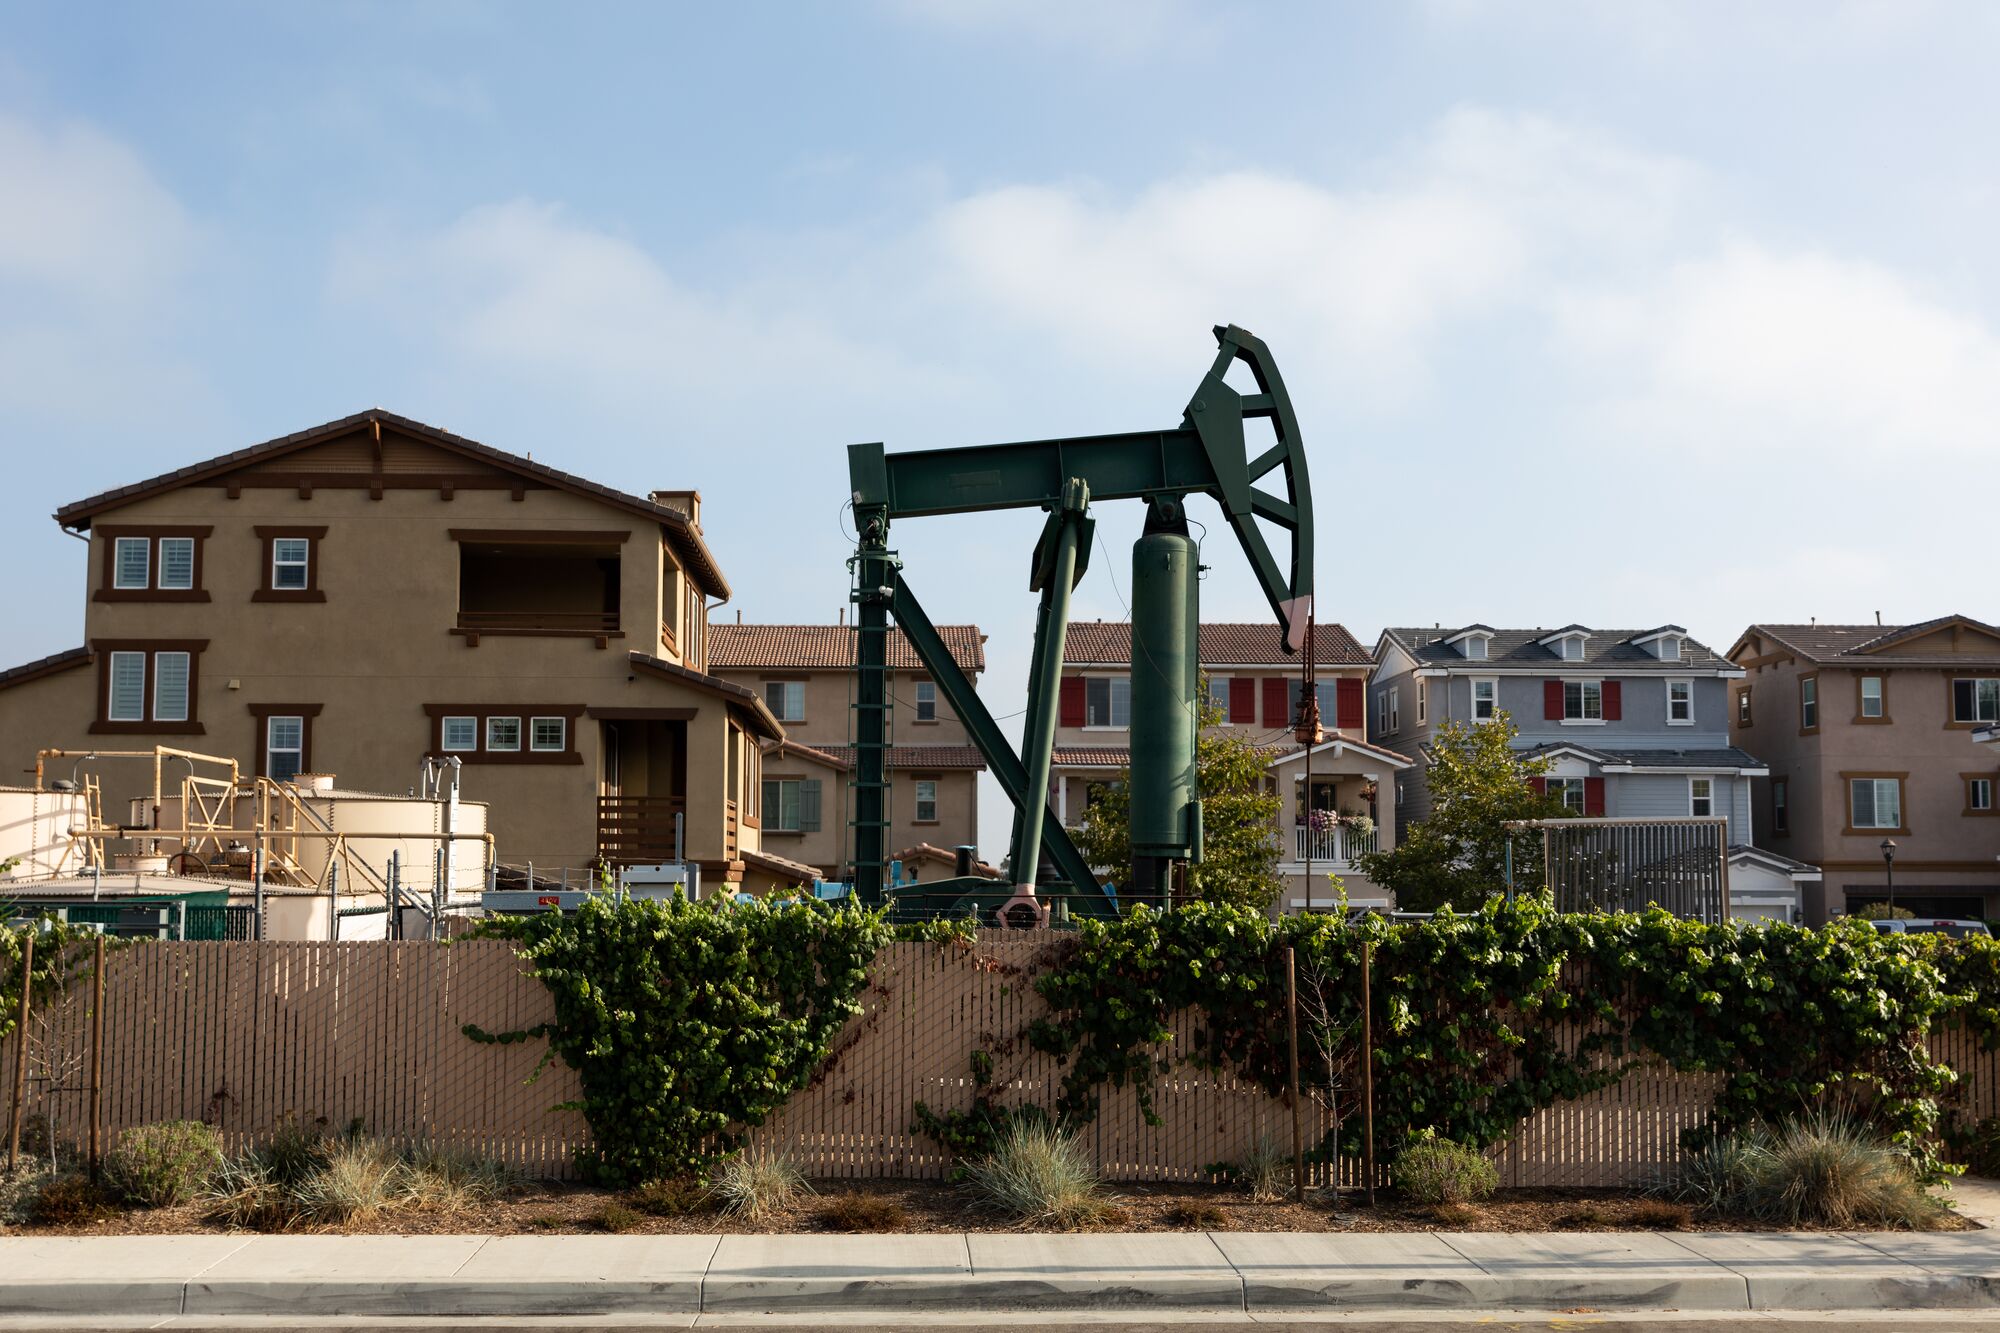 Signal Hill, an affluent suburb of Long Beach, features dozens of active oil wells and derricks around the town many in commercial parking lots and residential areas only feet from homes.